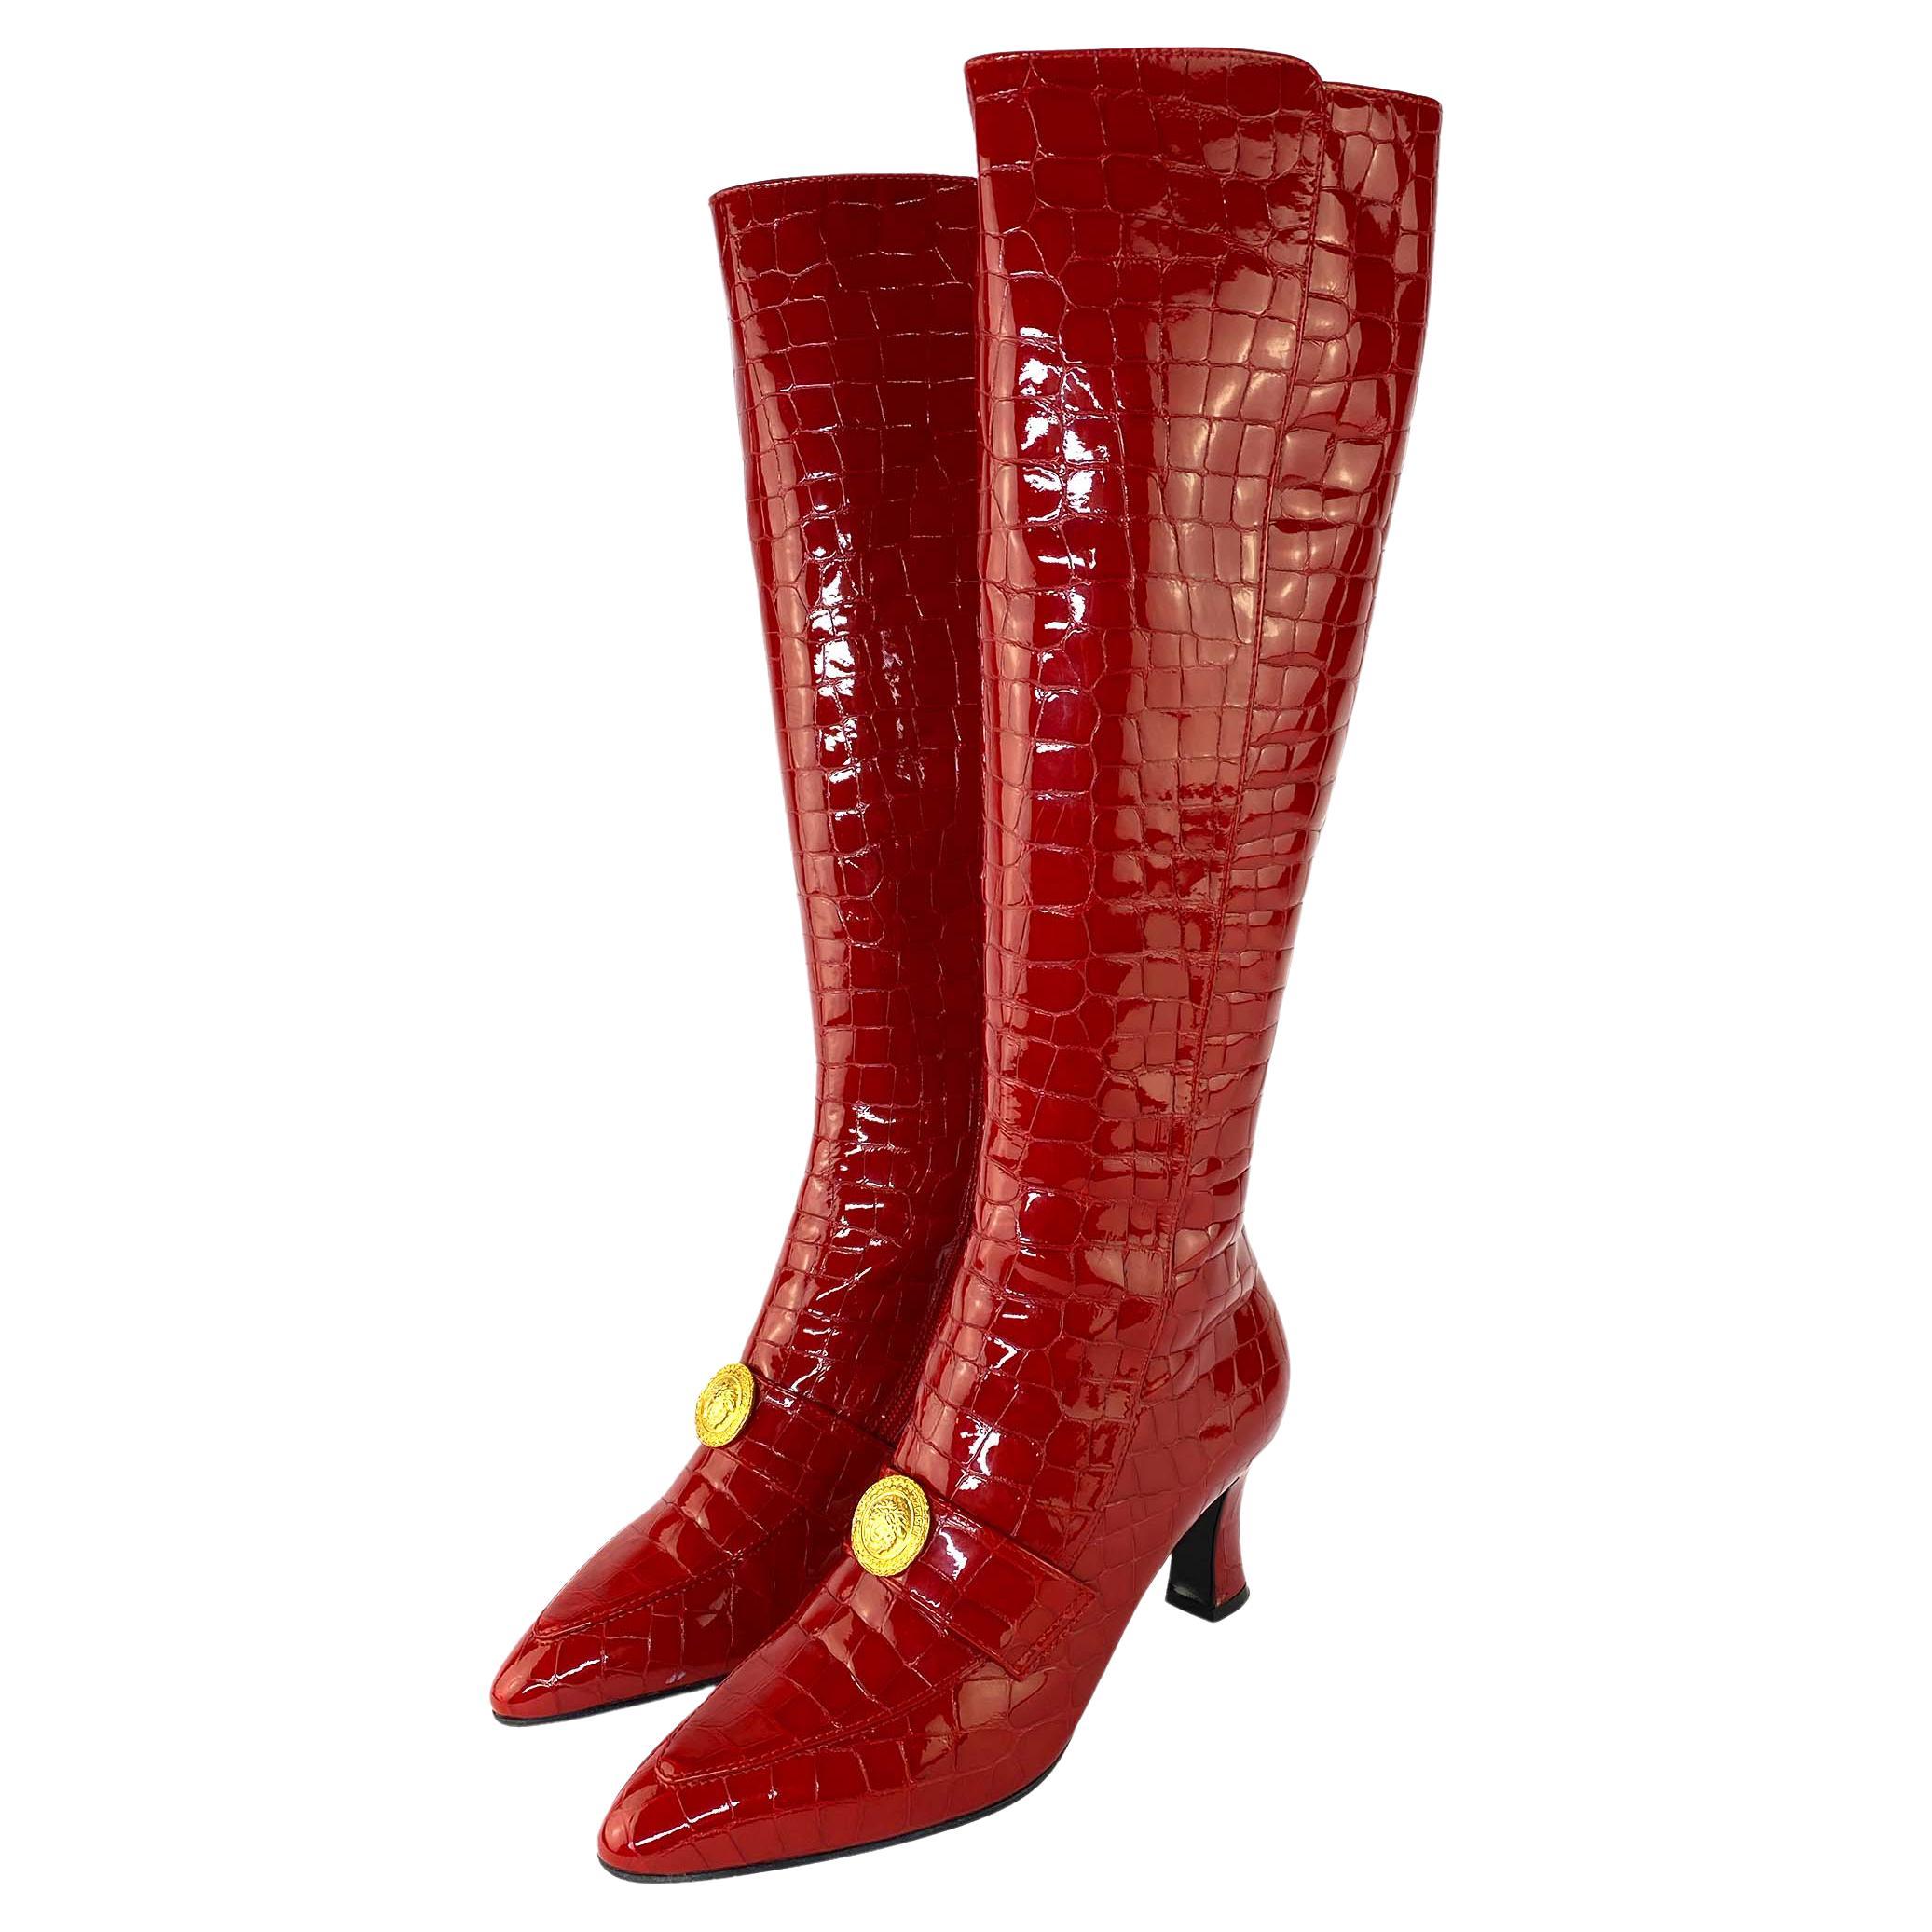 1990s Gianni Versace Gold Medusa Red Croc Embossed Patent Leather Boots